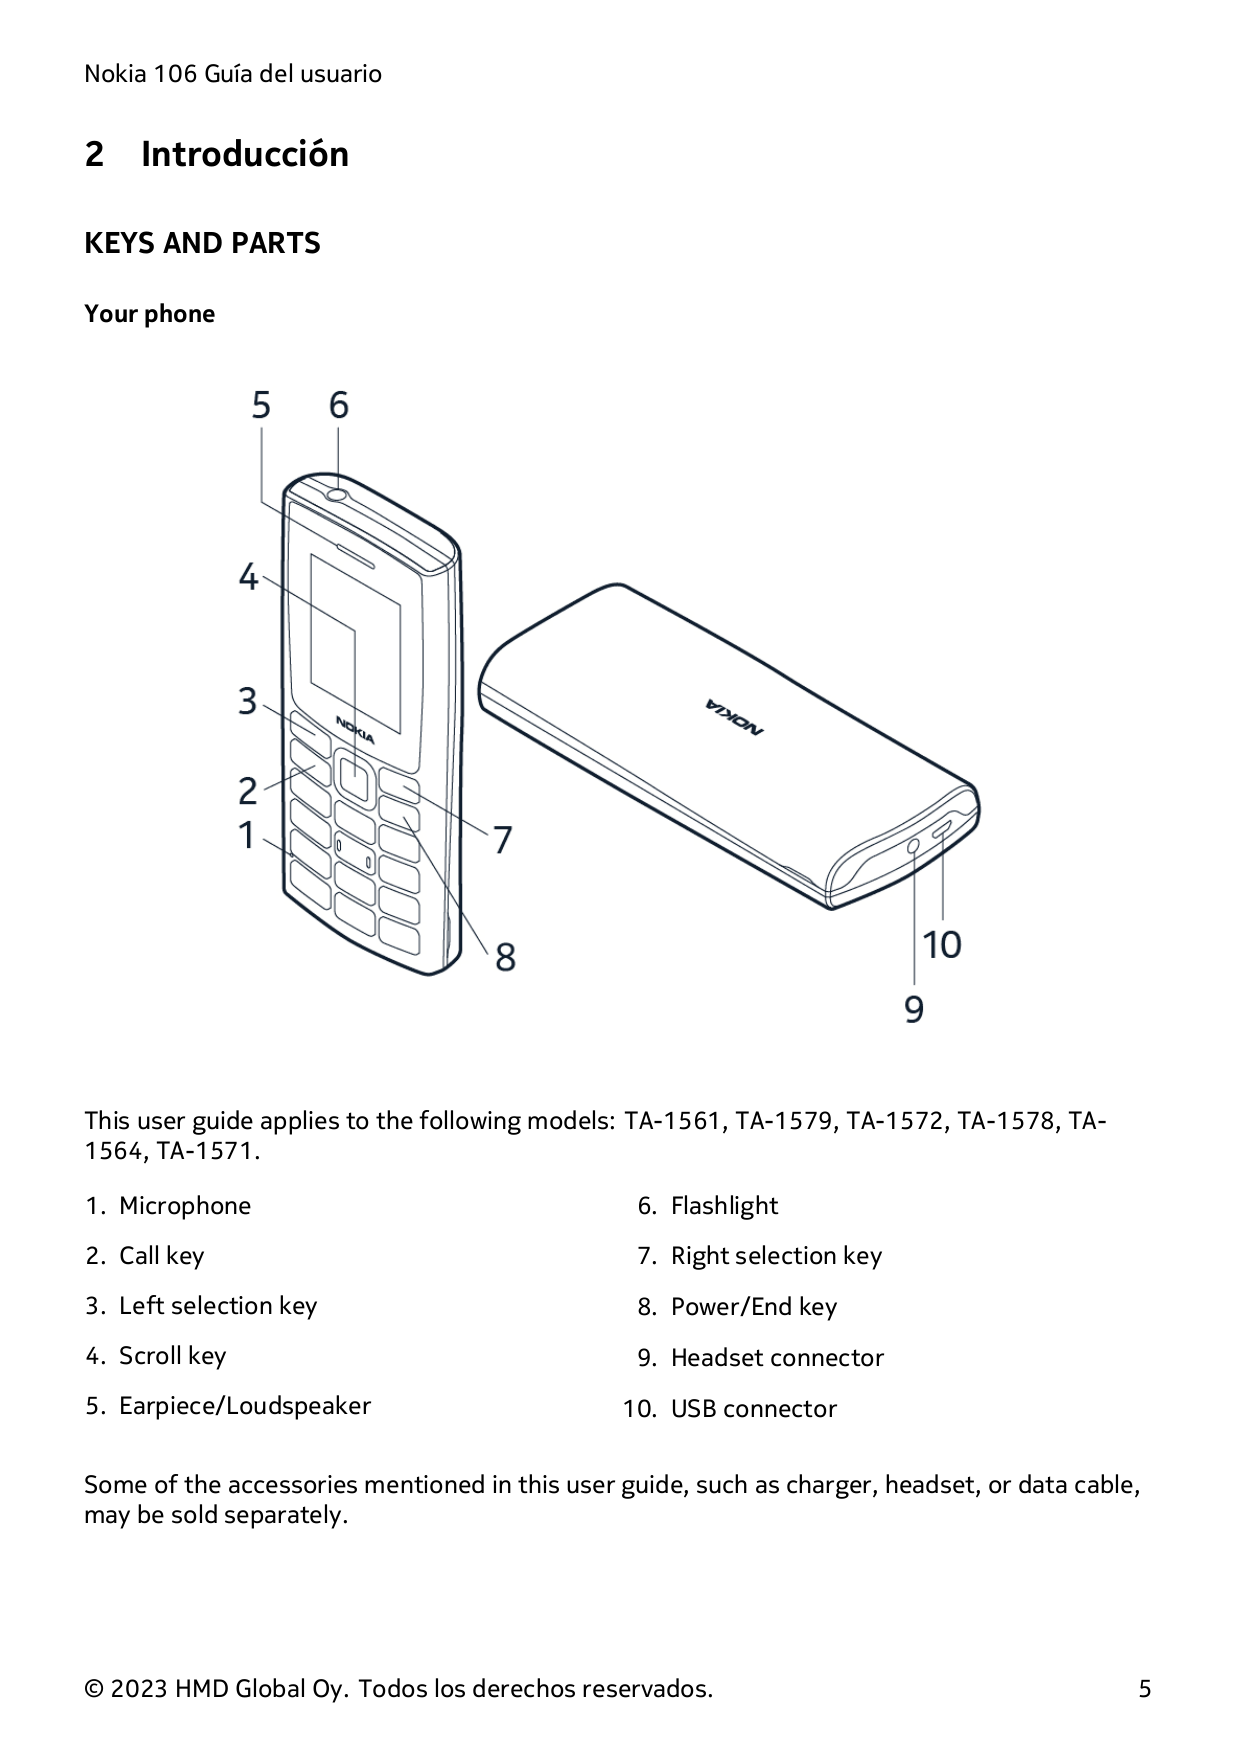 Nokia 106 Guía del usuario2IntroducciónKEYS AND PARTSYour phoneThis user guide applies to the following models: TA-1561, TA-1579